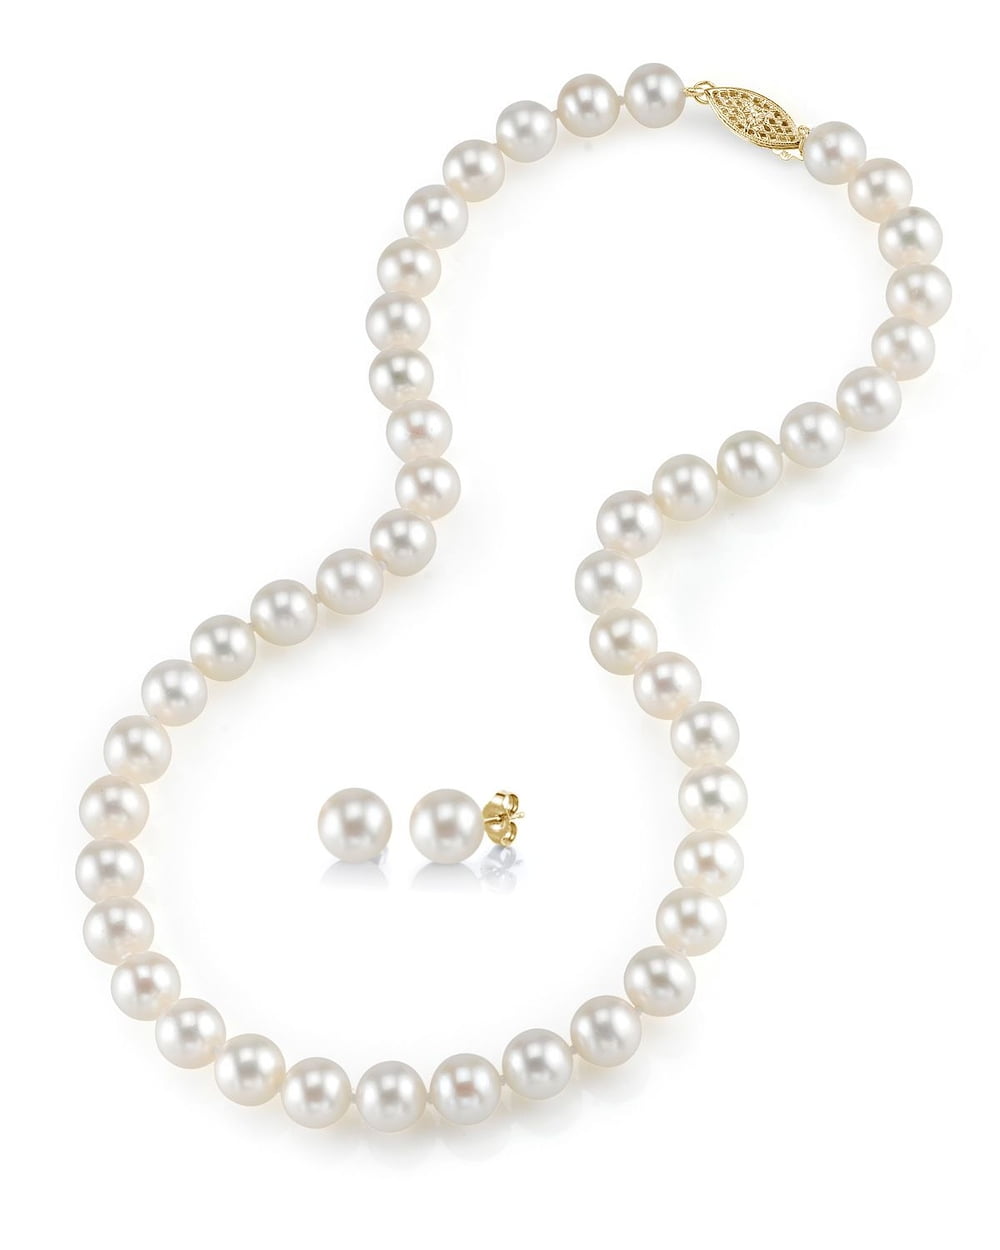 14k Gold 8-9mm White Egg Shape Fresh Water Cultured Pearl Necklace